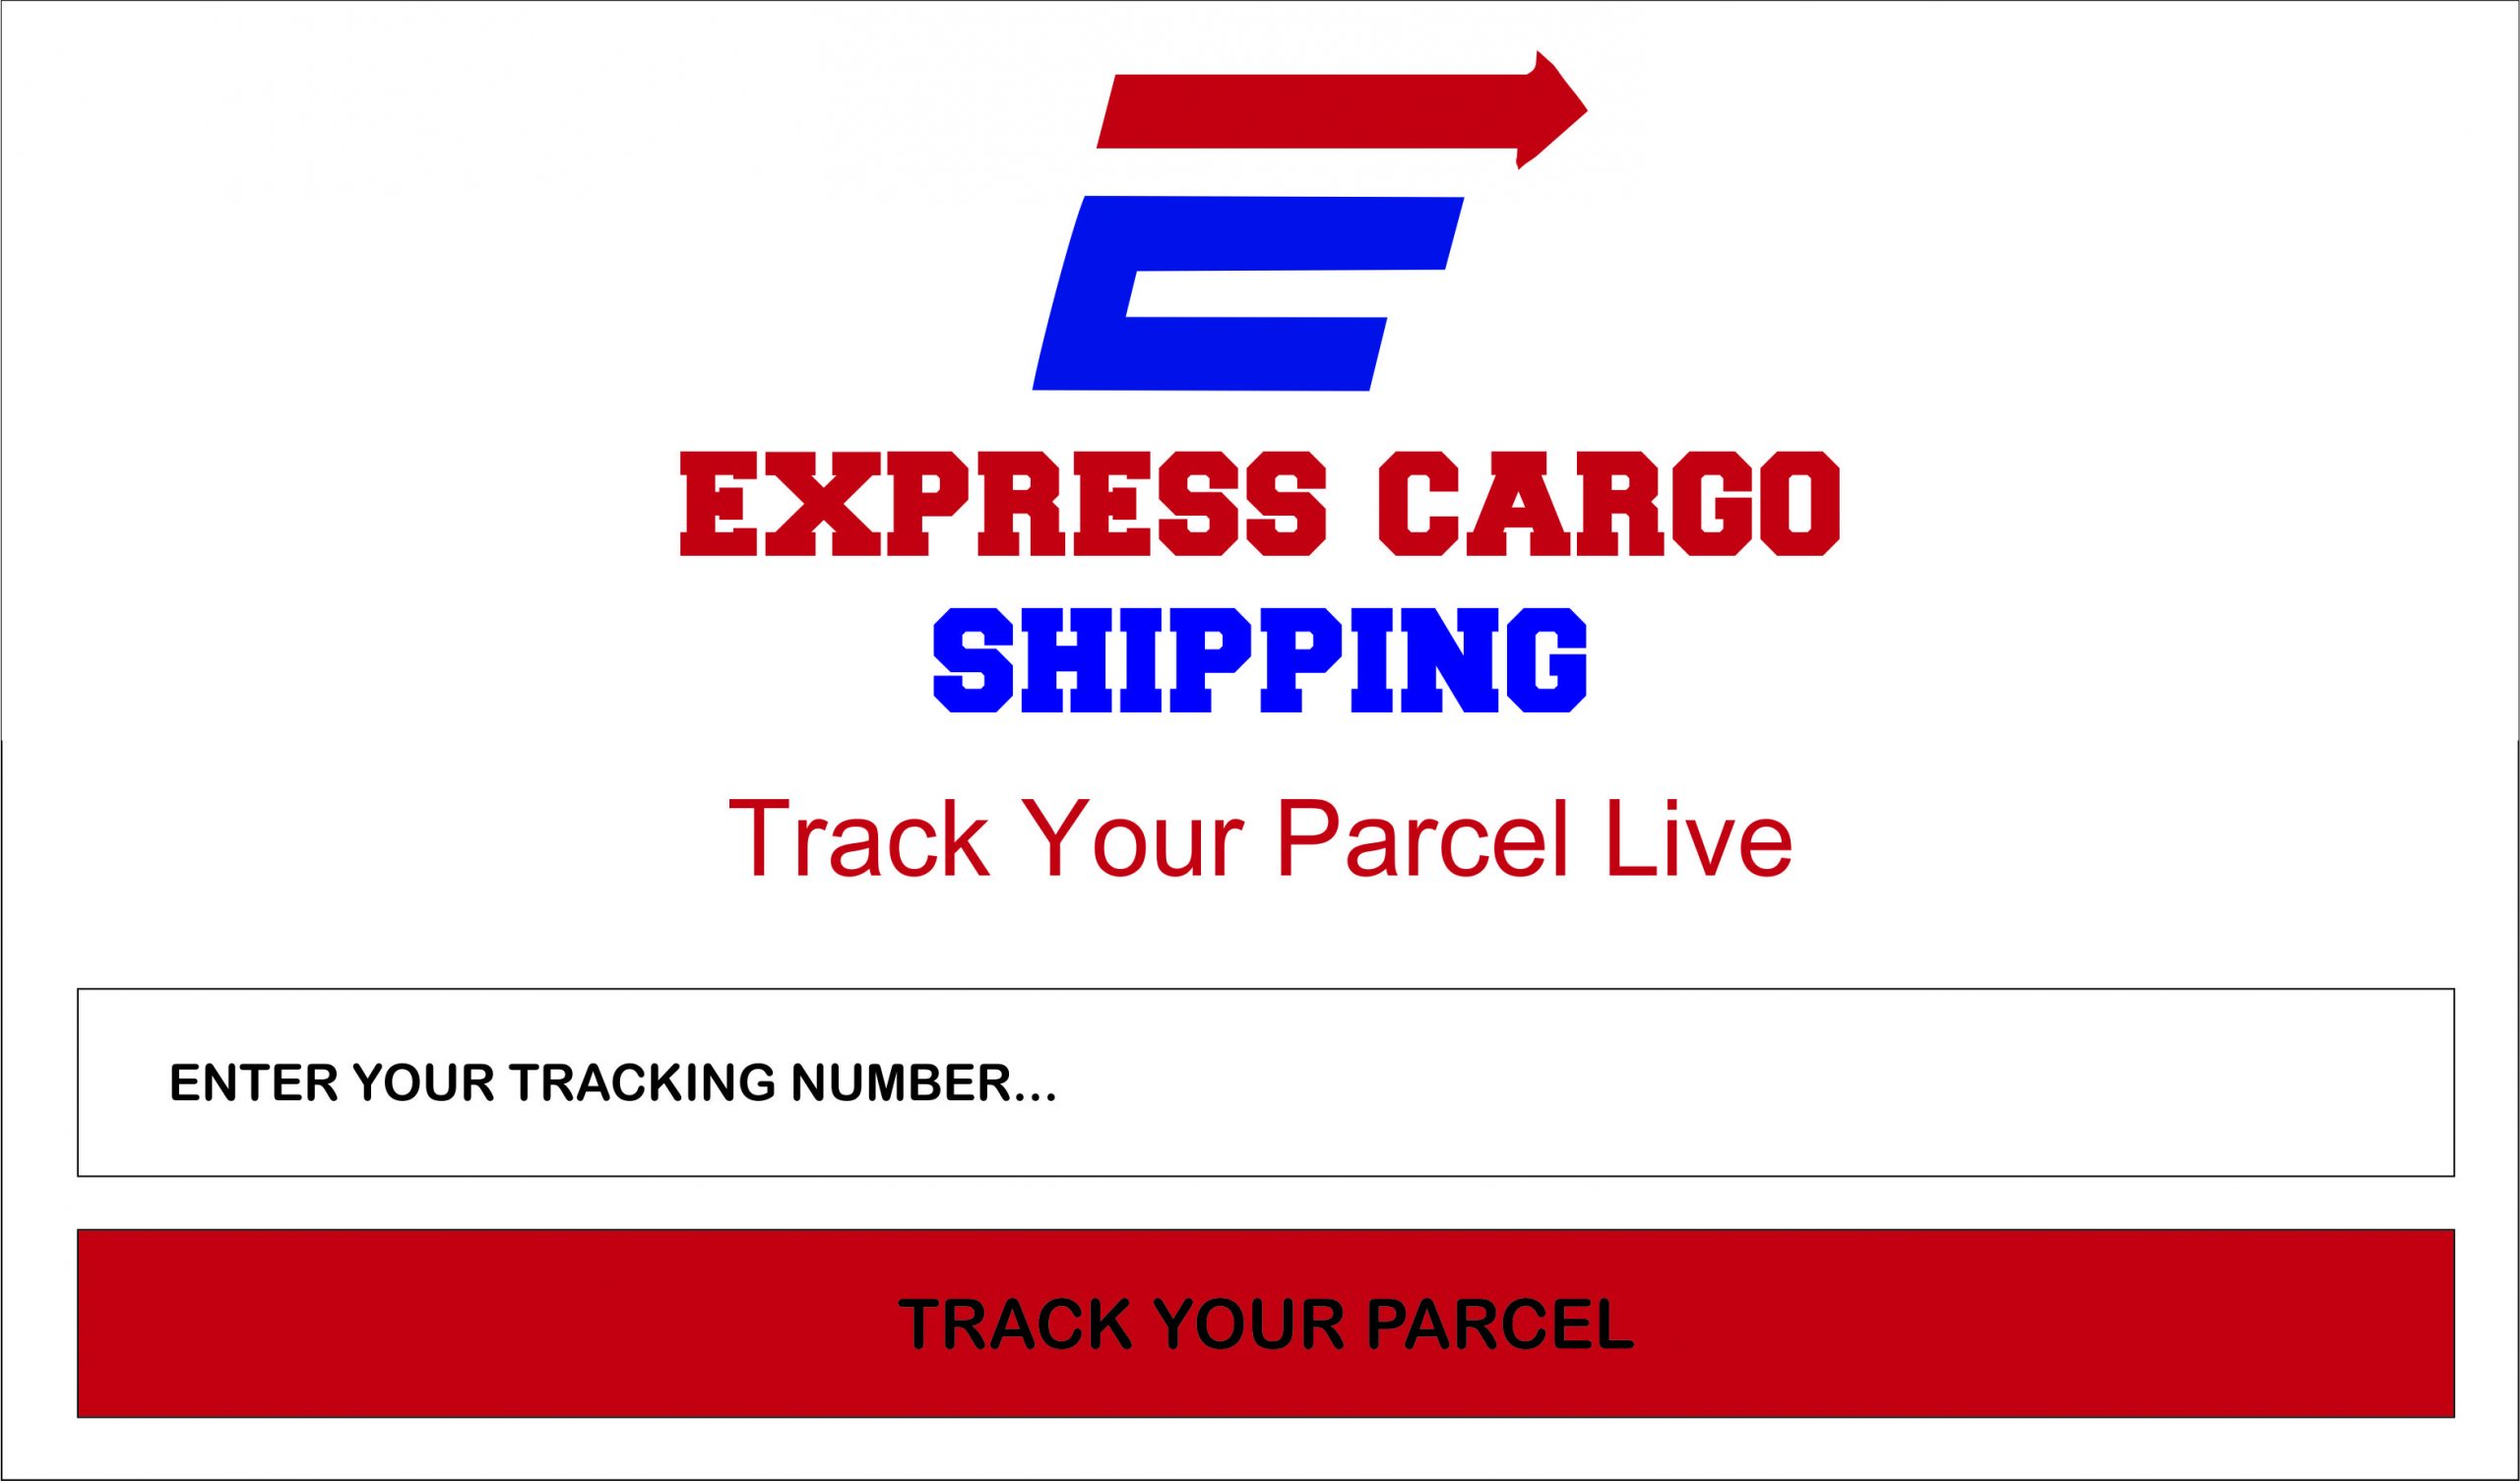 Track your parcel